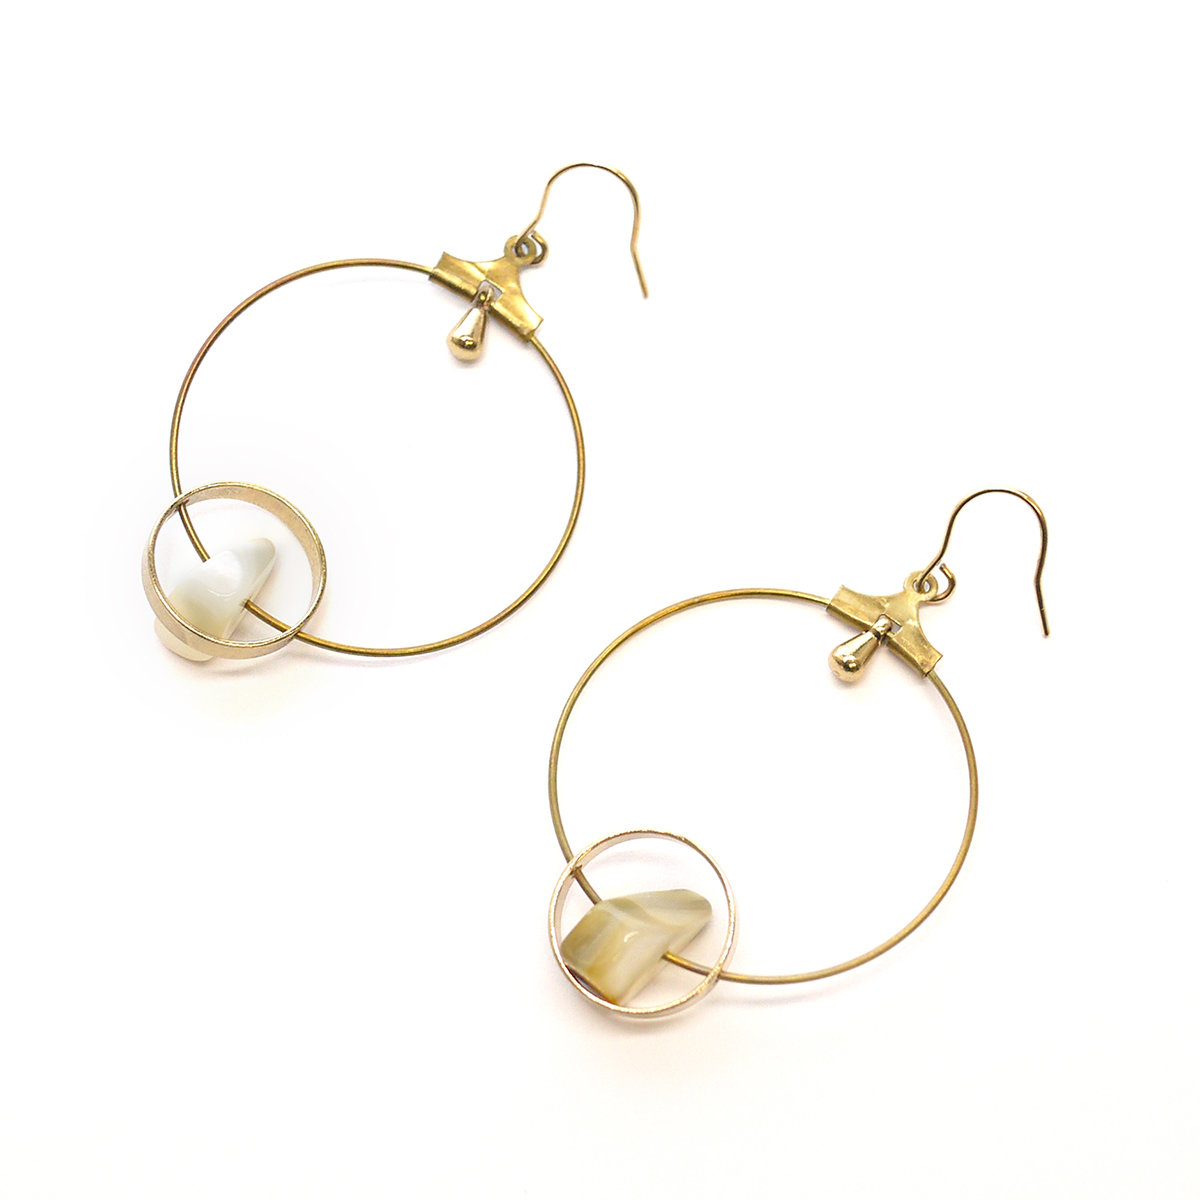 Round earrings with pearl stones